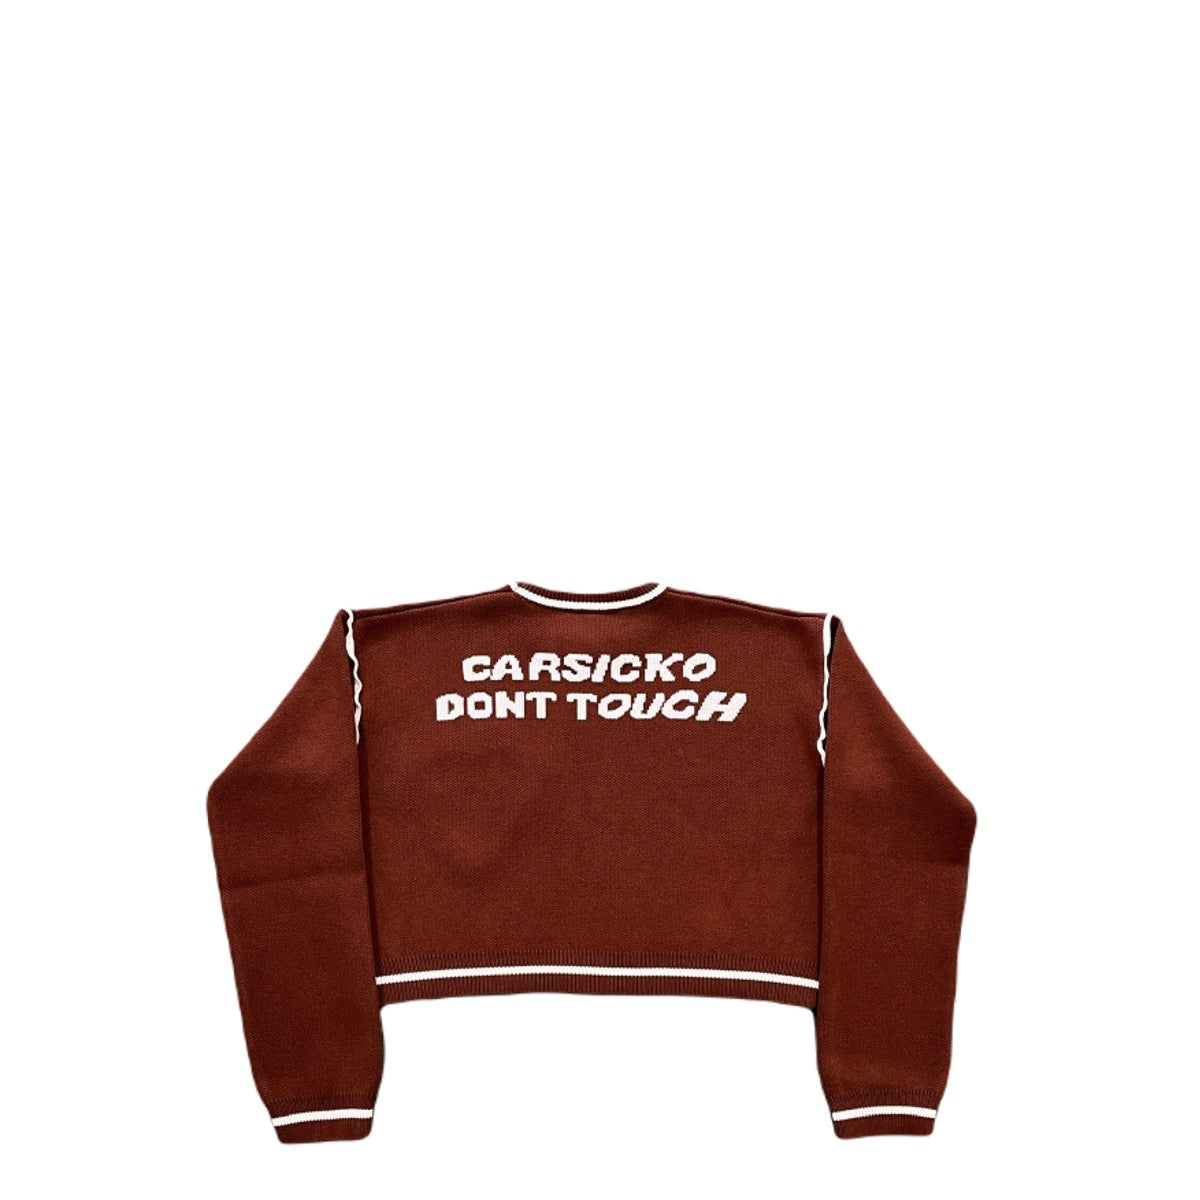 Carsicko Don't Touch Knit Sweater - Brown